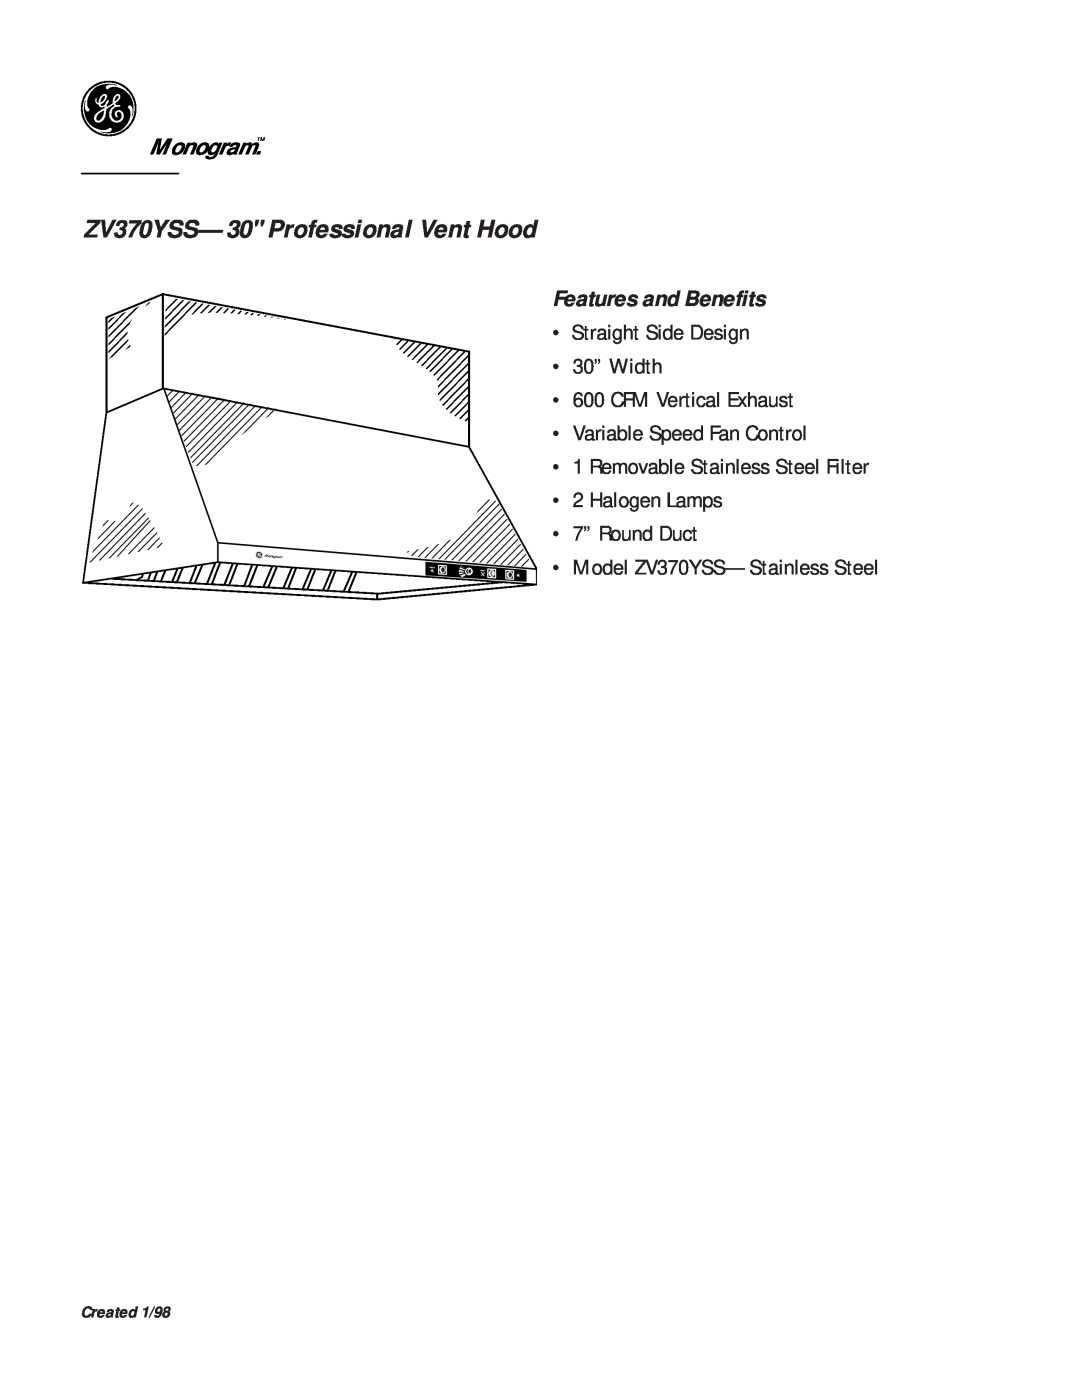 GE ZV370YSS--30 dimensions Features and Benefits, ZV370YSS-30 Professional Vent Hood, Monogram, Created 1/98 